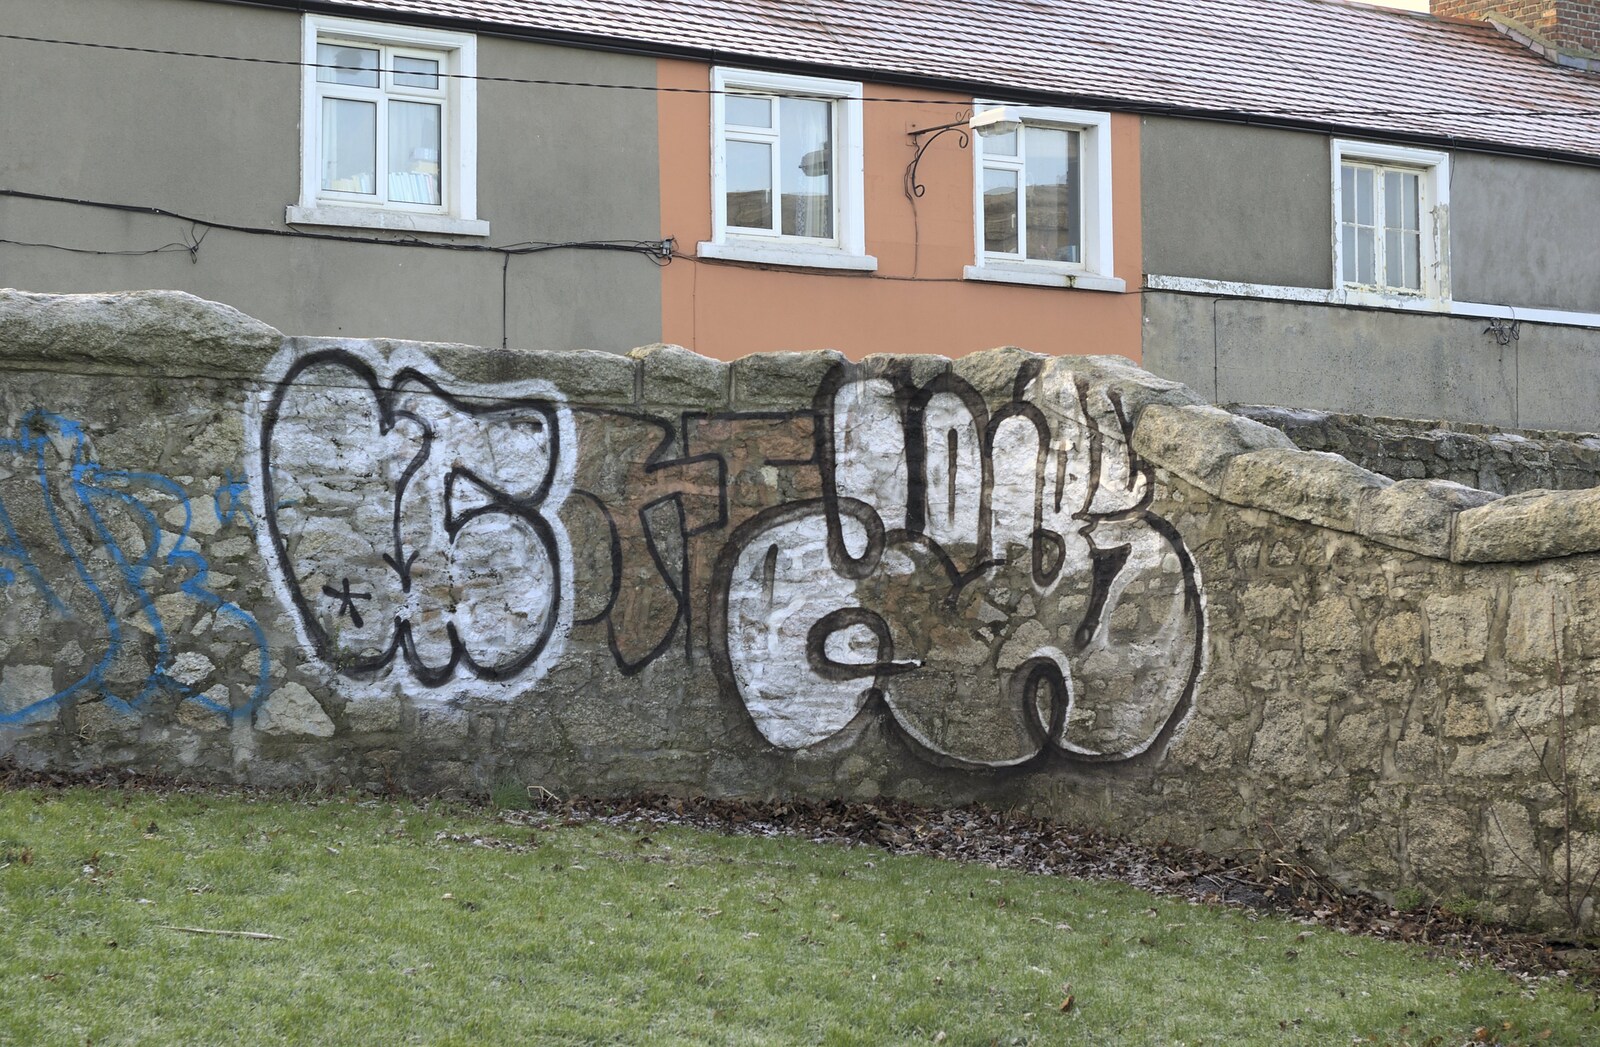 Graffiti on a wall from Christmas at Number 19, Blackrock, County Dublin, Ireland - 25th December 2009